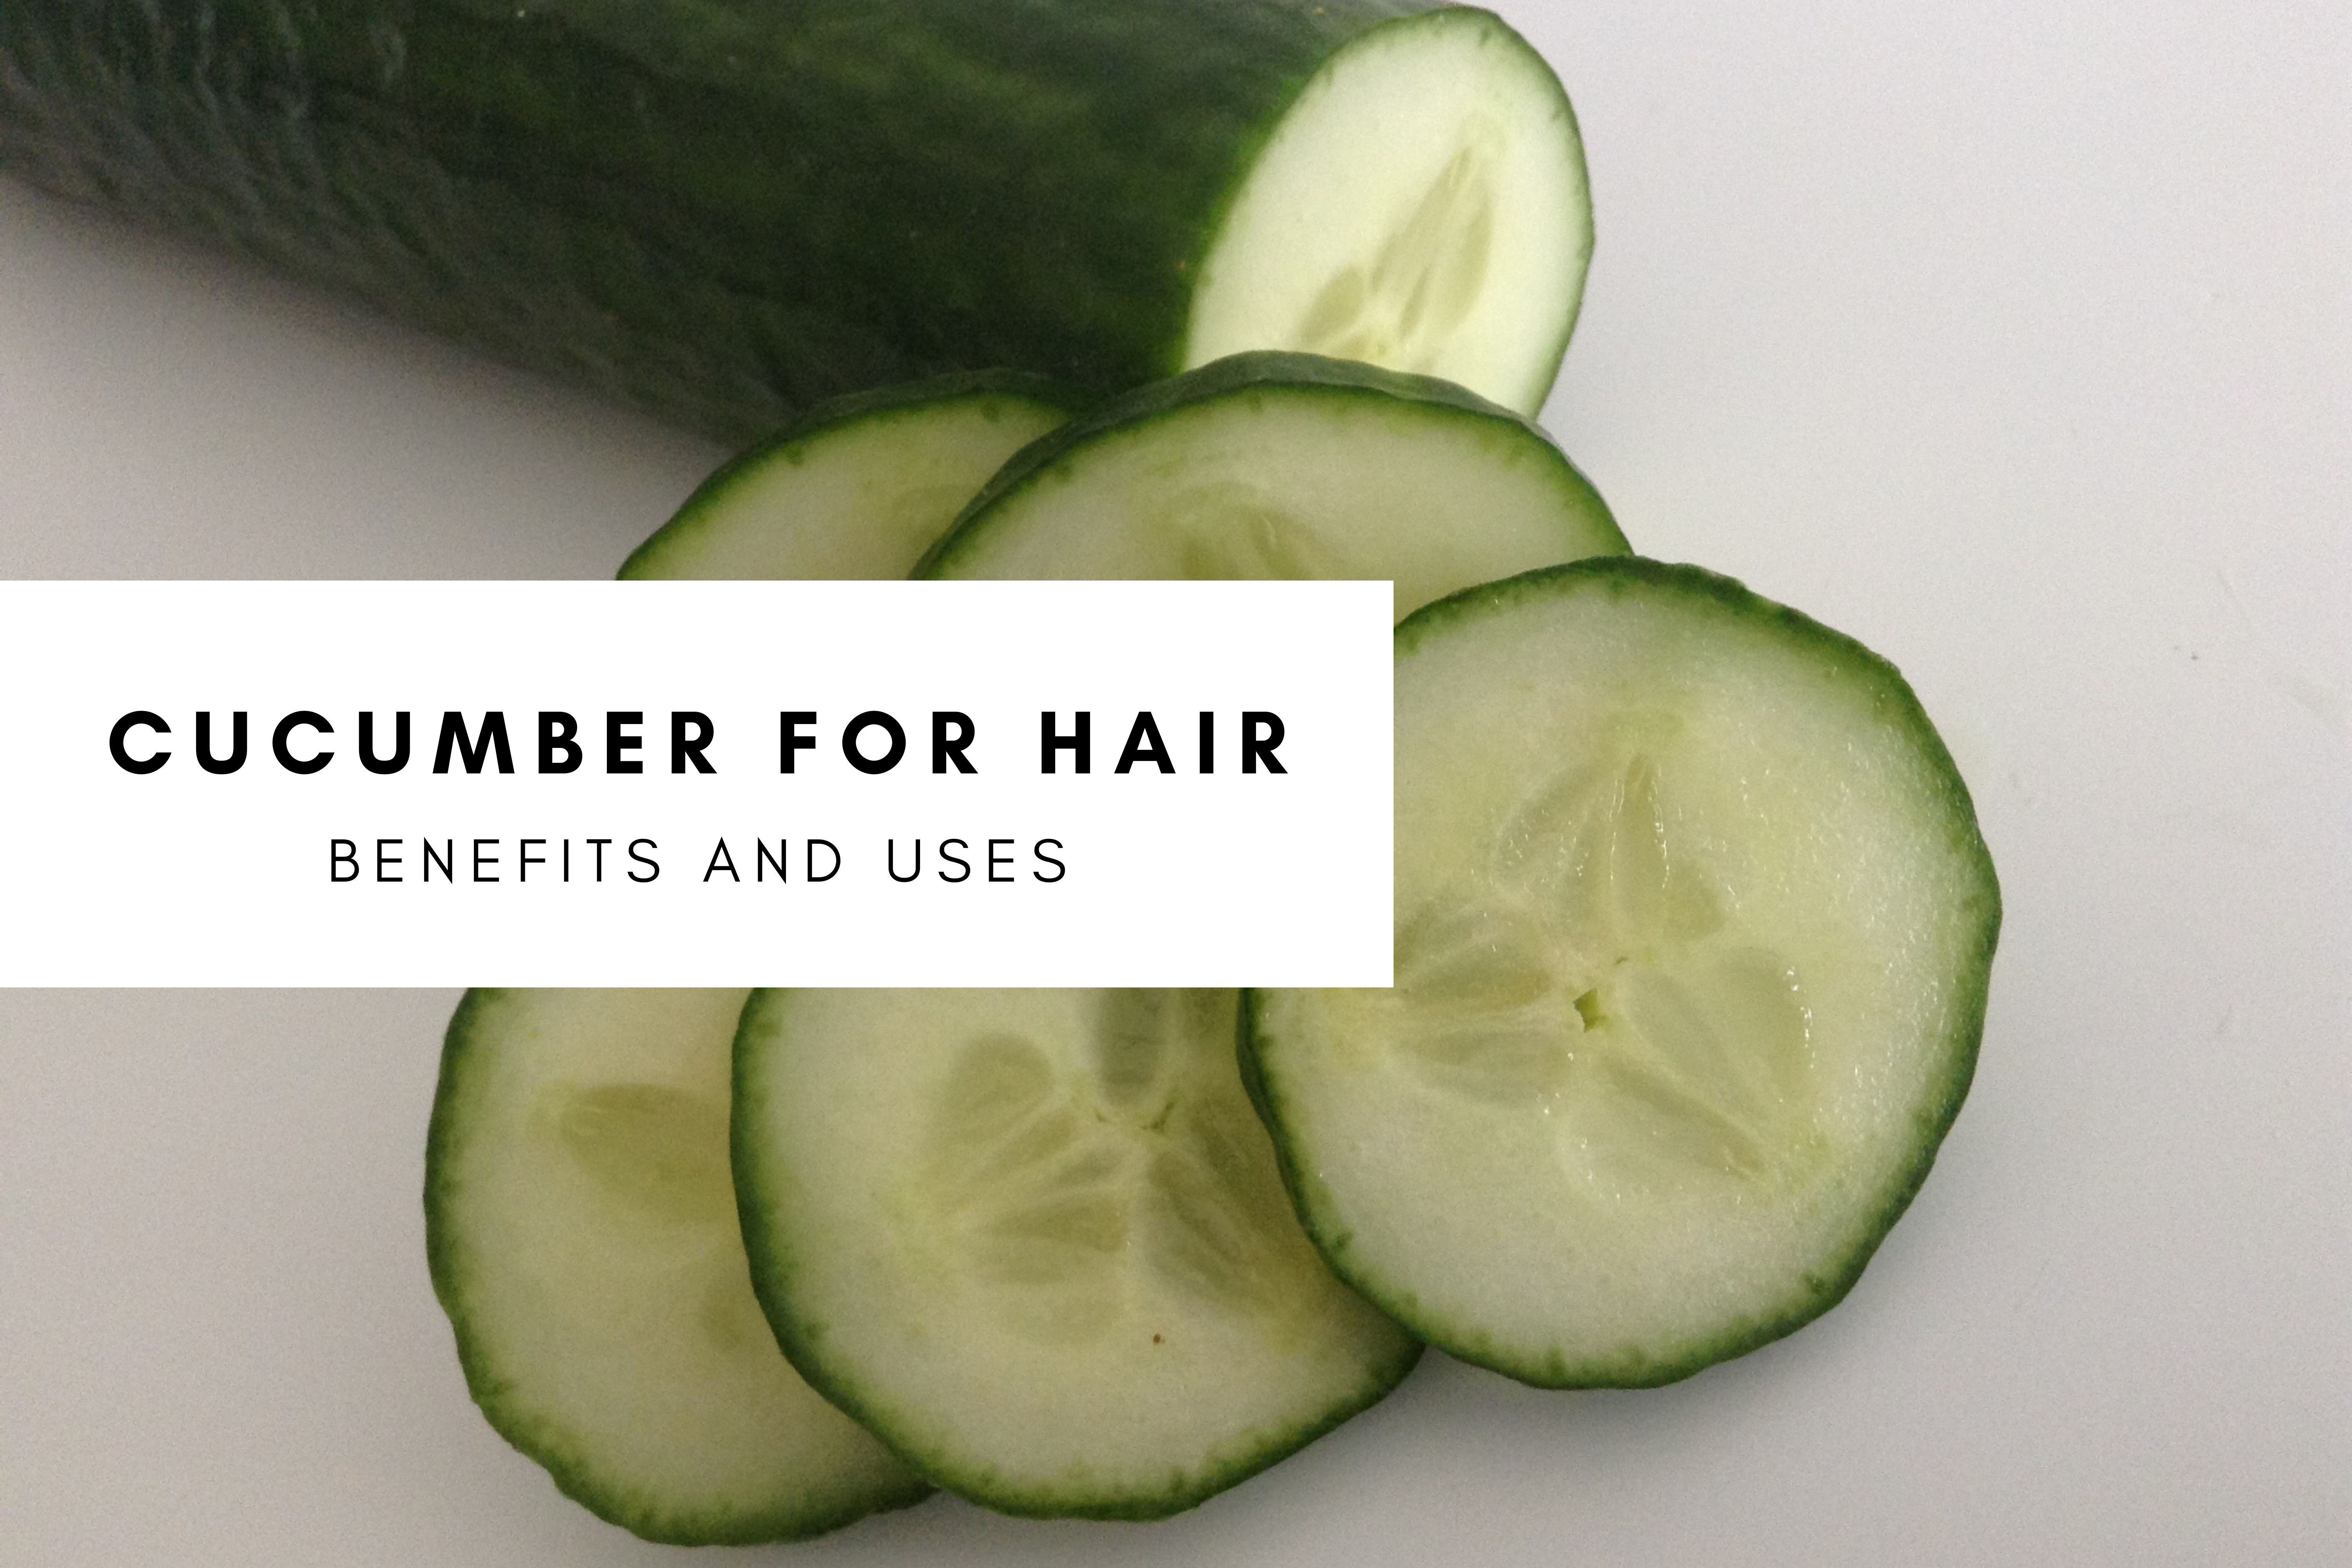 Cucumber for Hair: Benefits and Uses